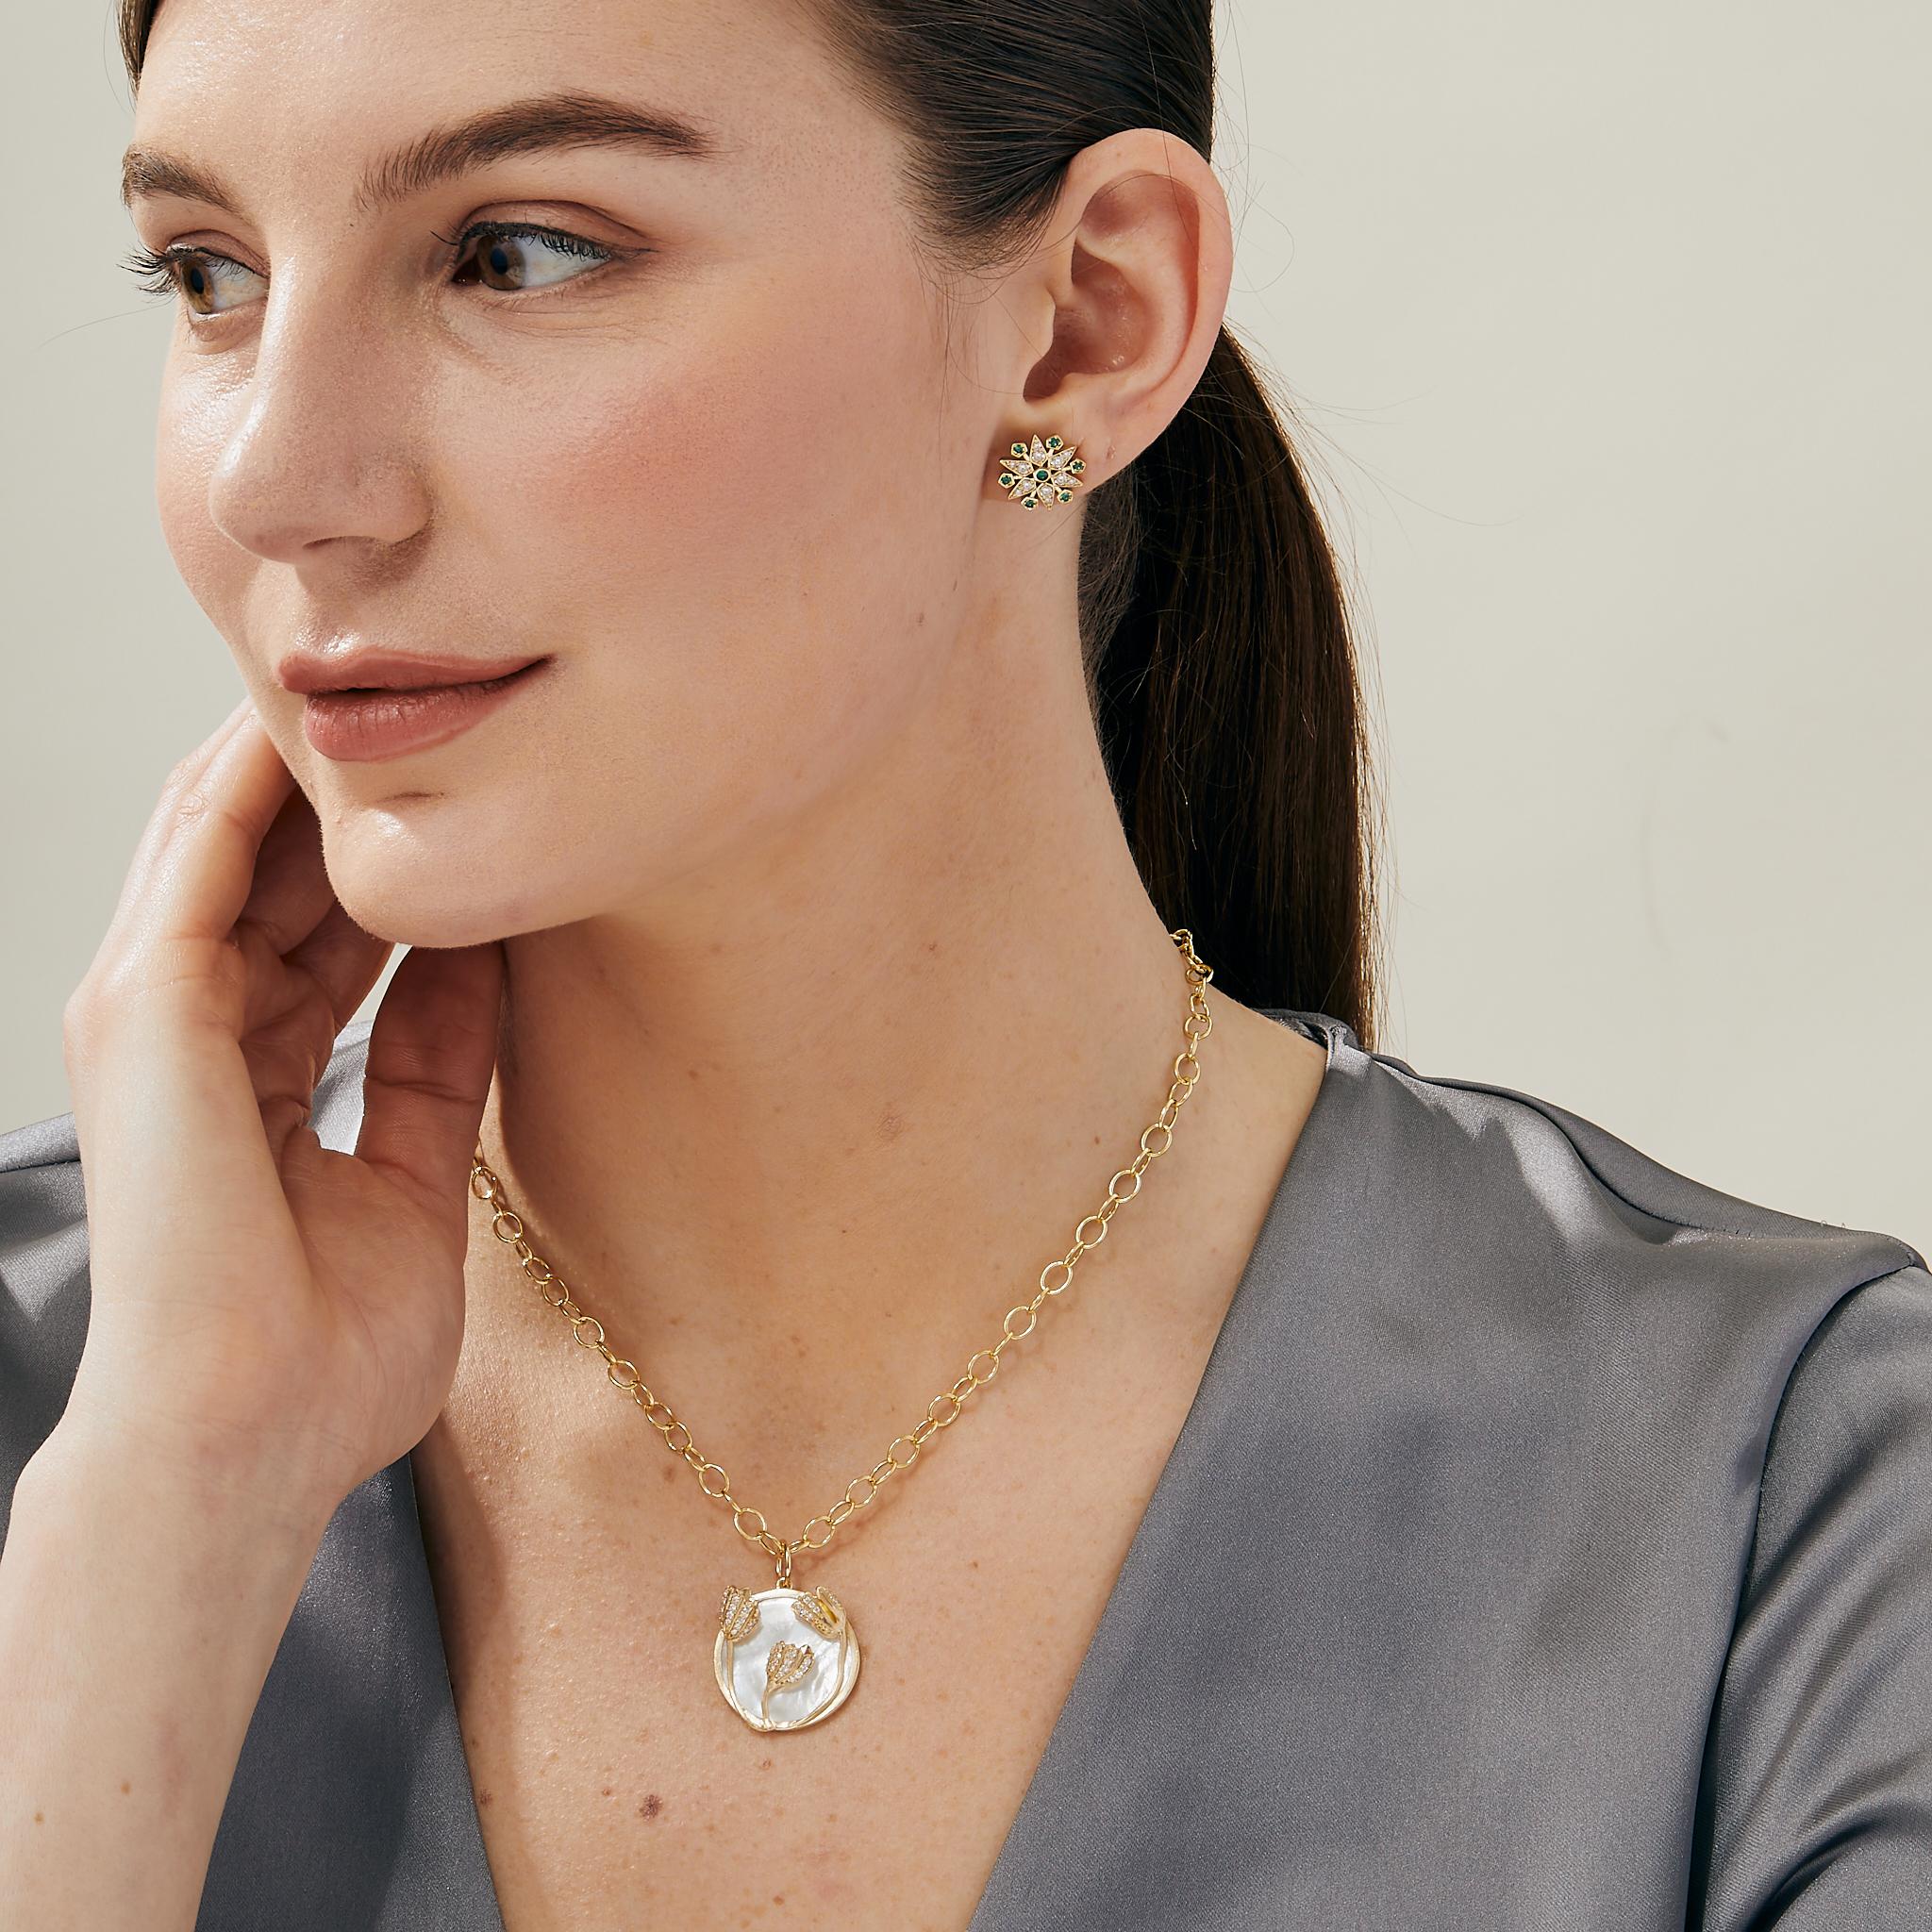 Created in 18 karat yellow gold
Mother of pearl 6.50 carats approx.
Diamonds 0.30 carat approx.
Chain sold separately 

Crafted with 18-karat yellow gold, this luxurious pendant graces its silhouette with a mother-of-pearl gemstone of approximately